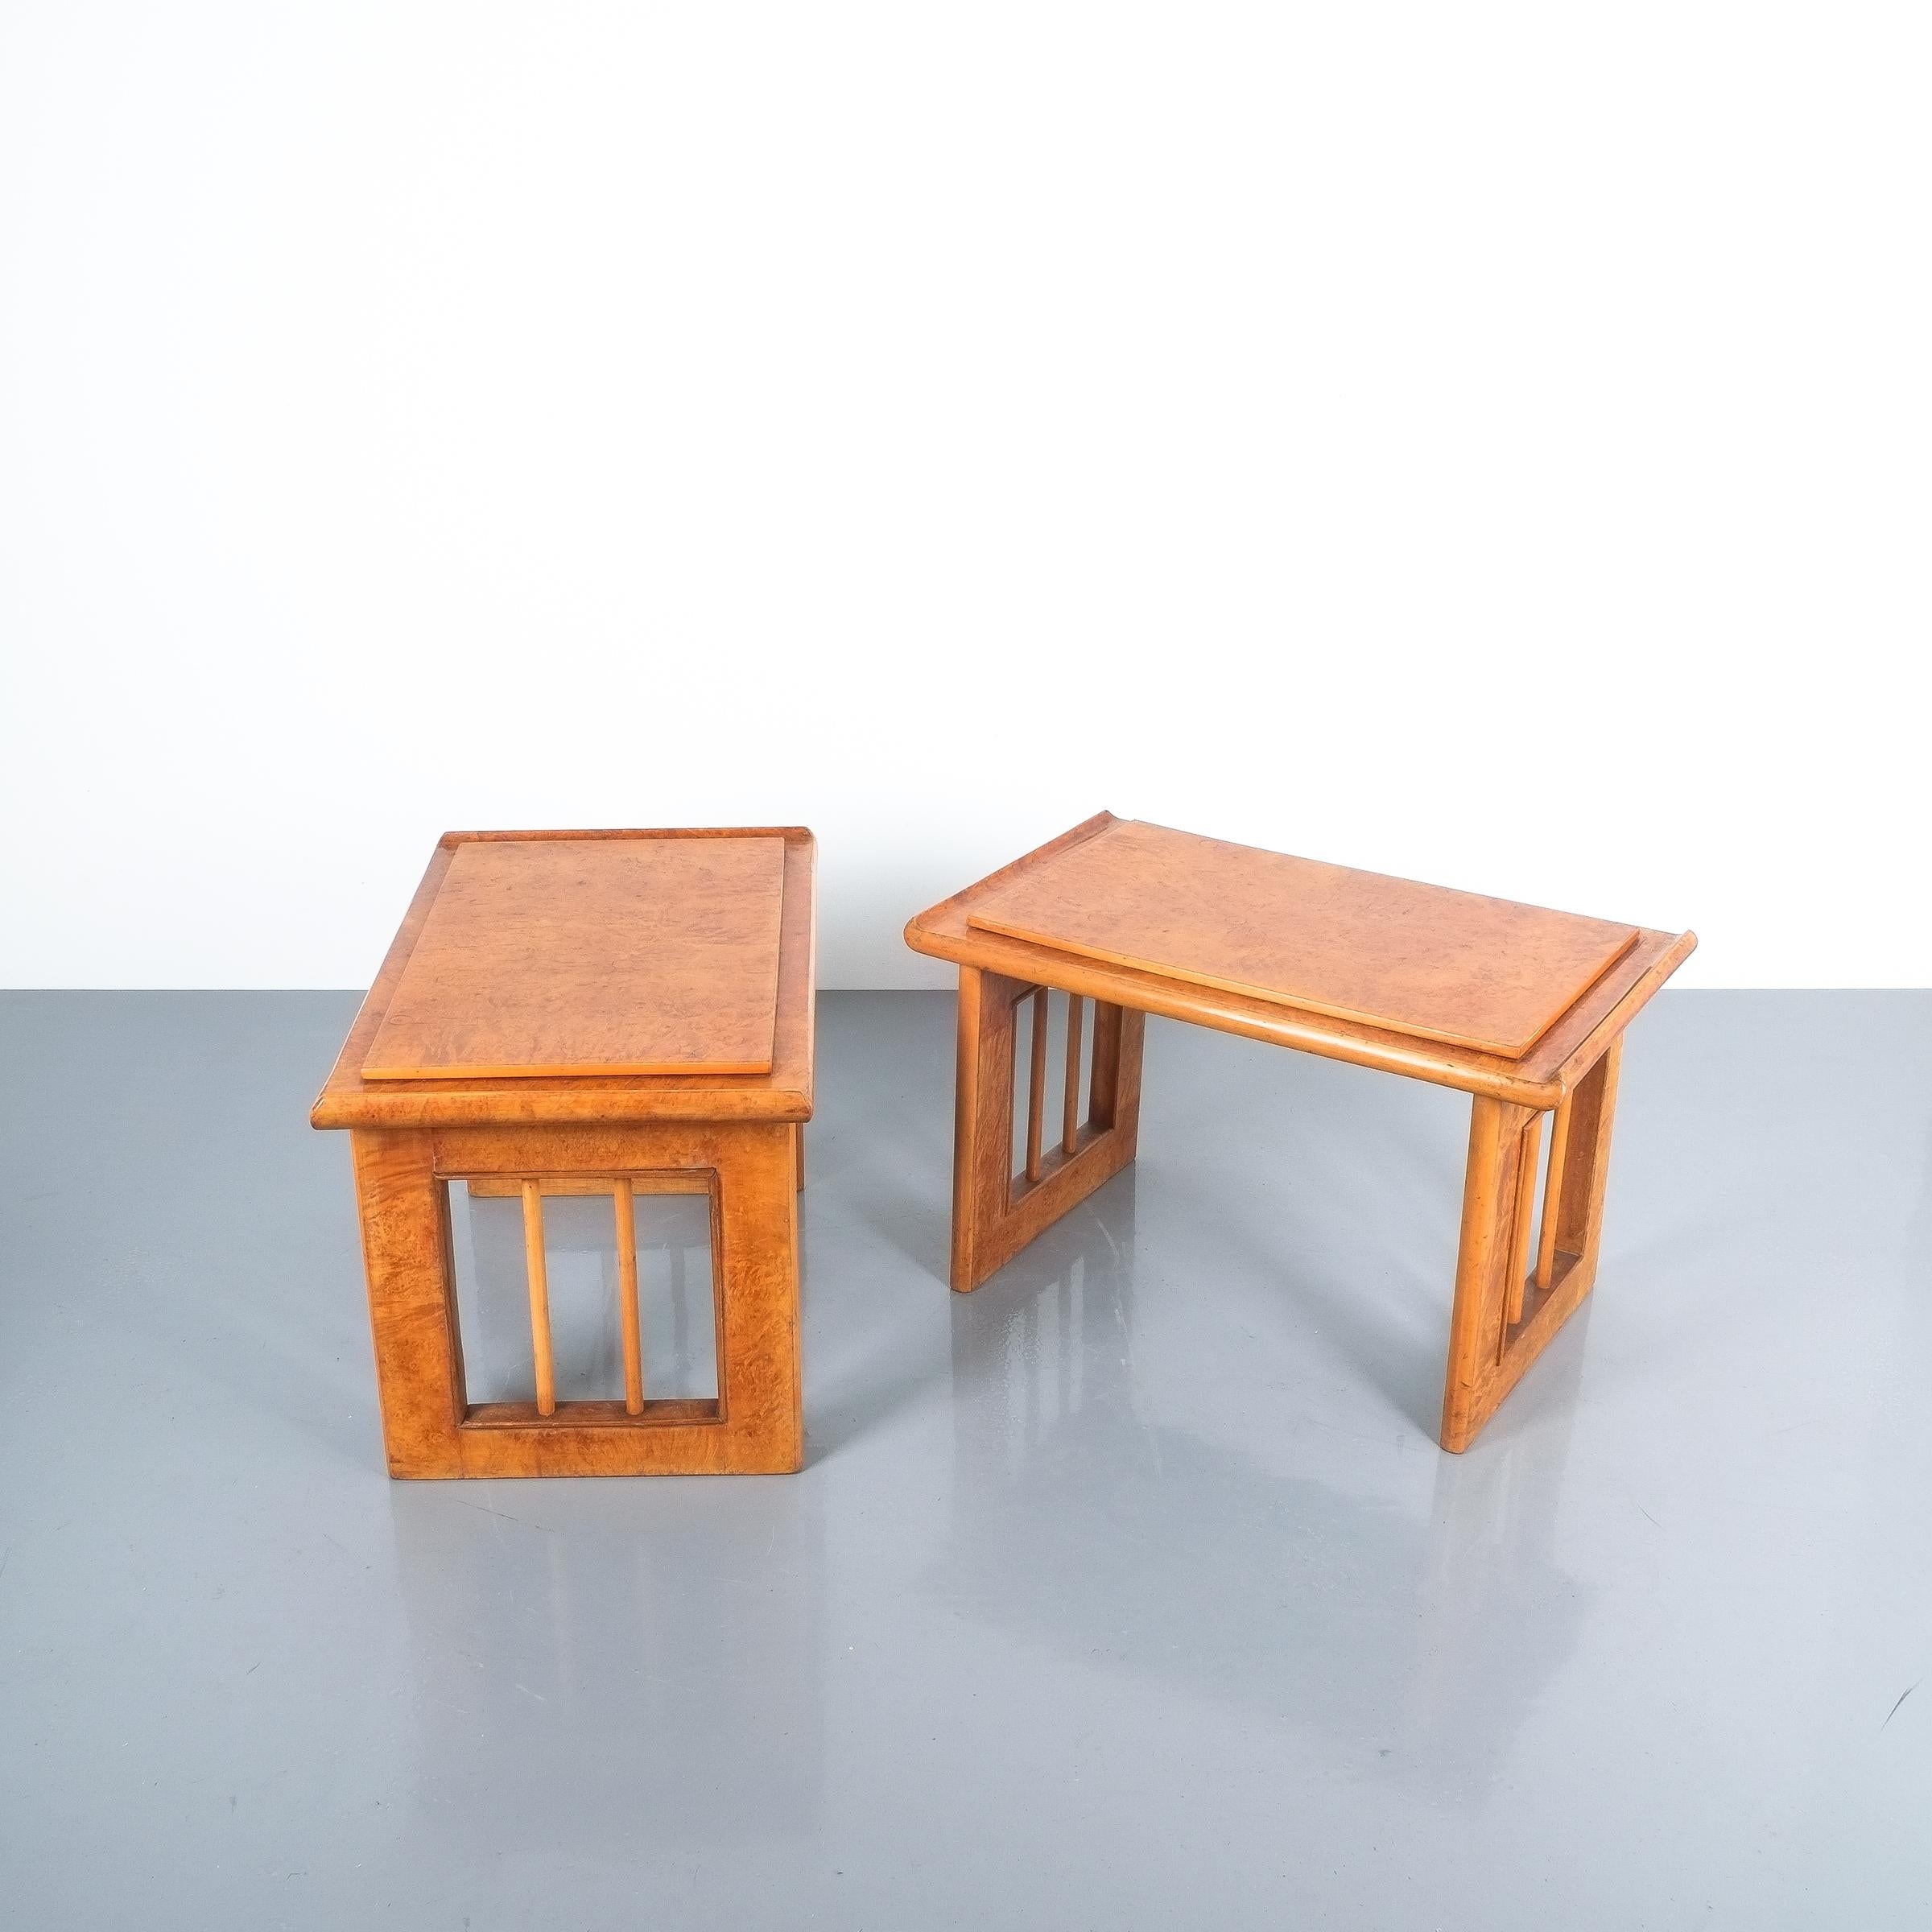 Italian Art Deco Nightstands or Sofa Side Tables from Burl Wood, Italy, circa 1940